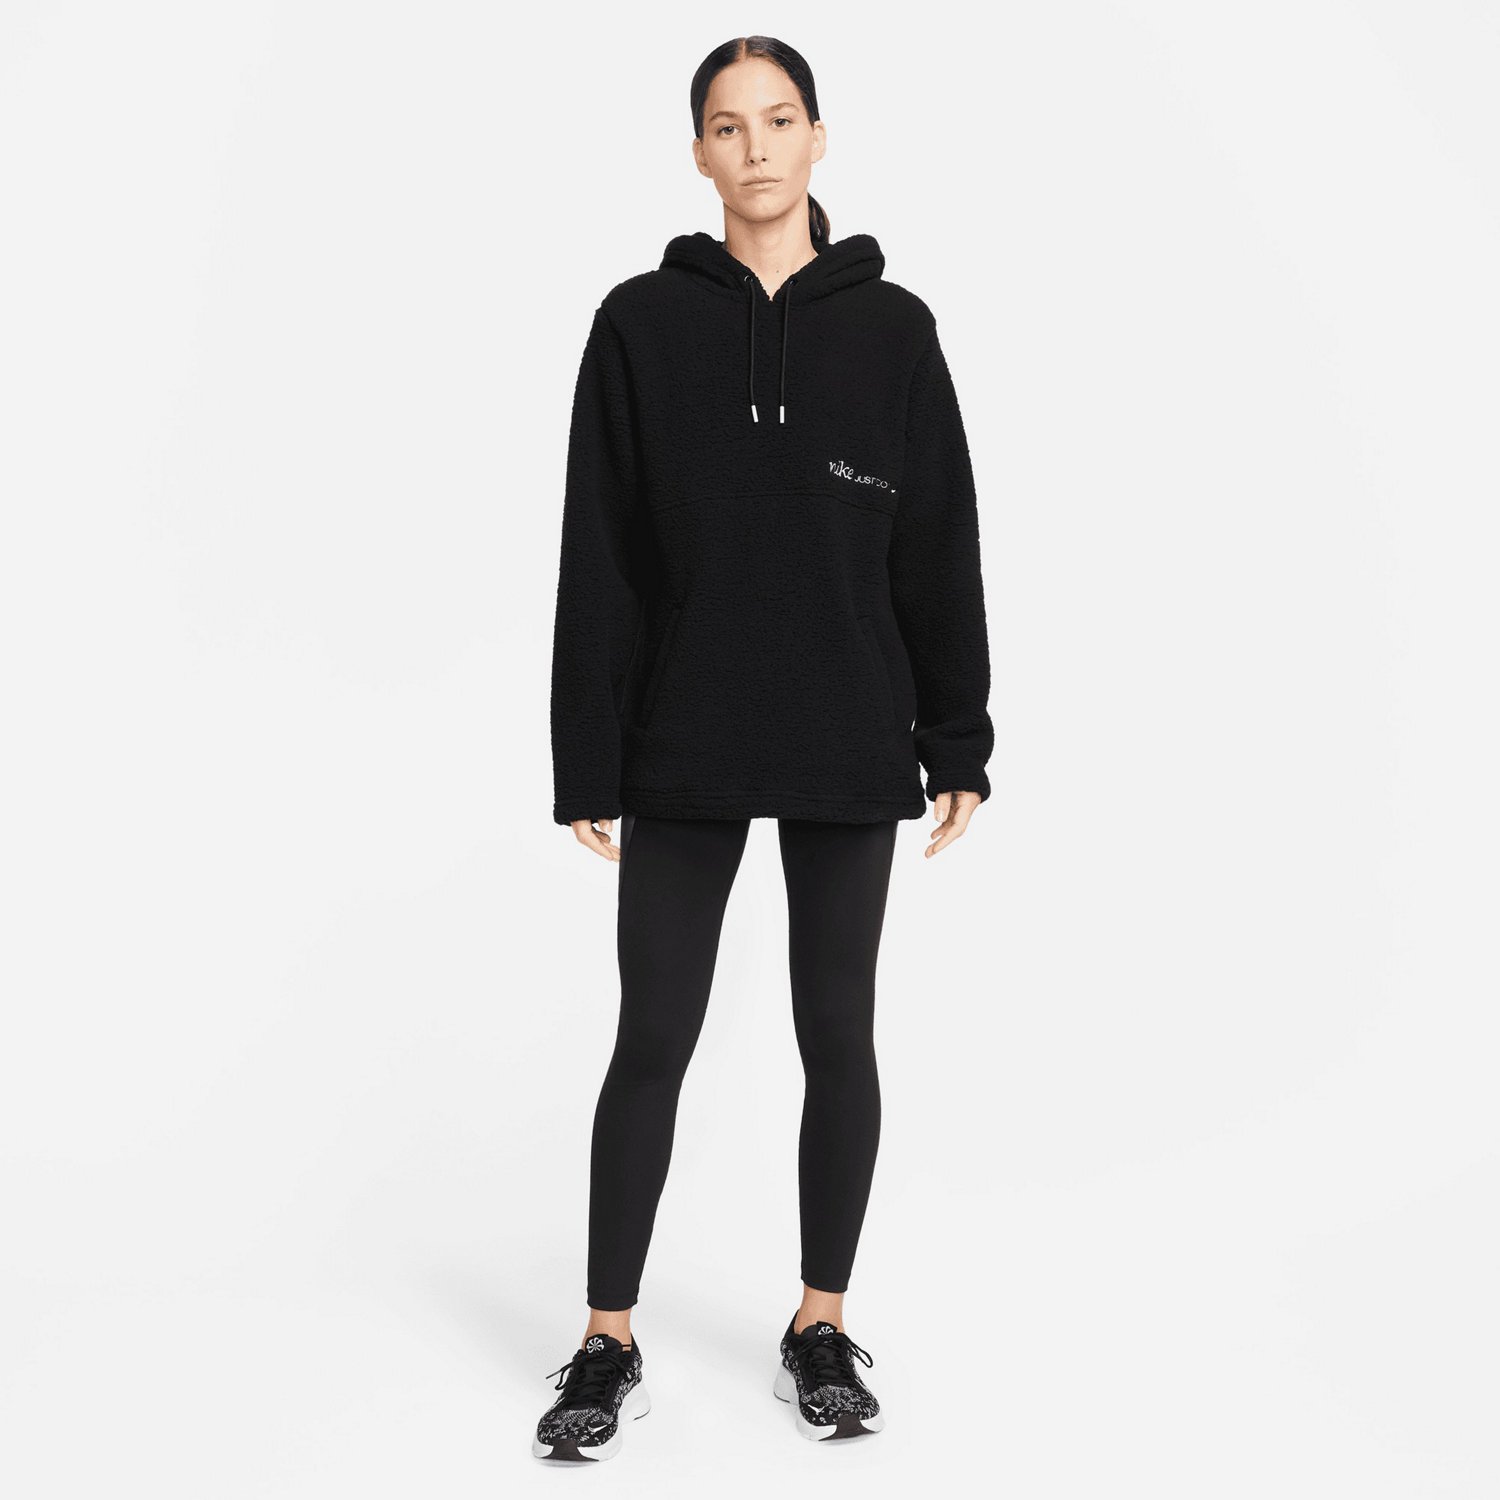 Nike Women's TF Cozy Core Top | Free Shipping at Academy